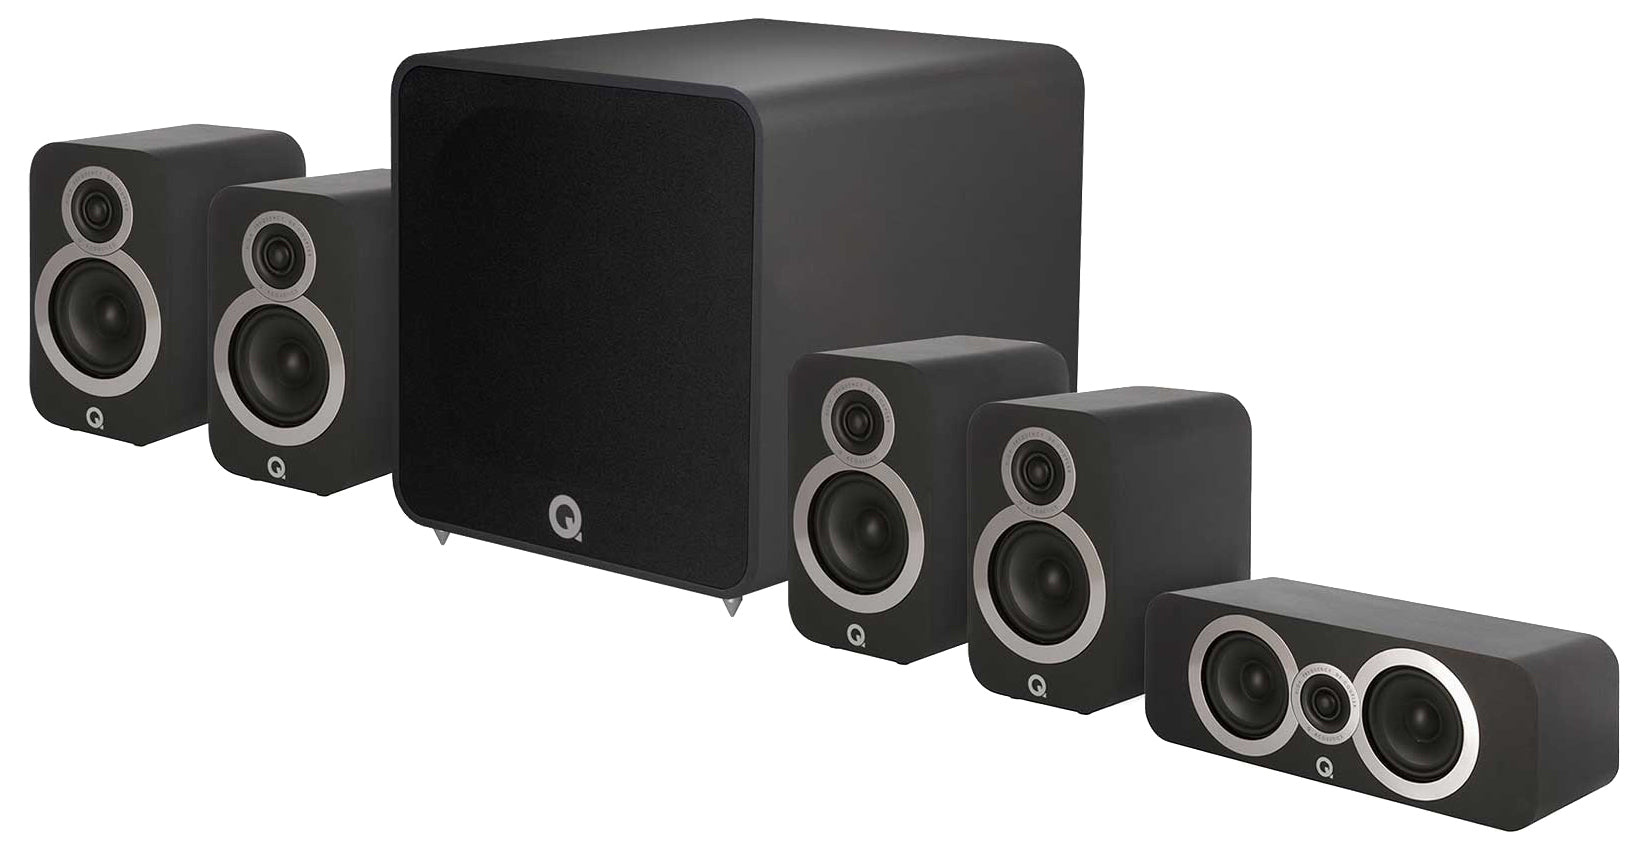 3010i 5.1 Plus Home Theater System